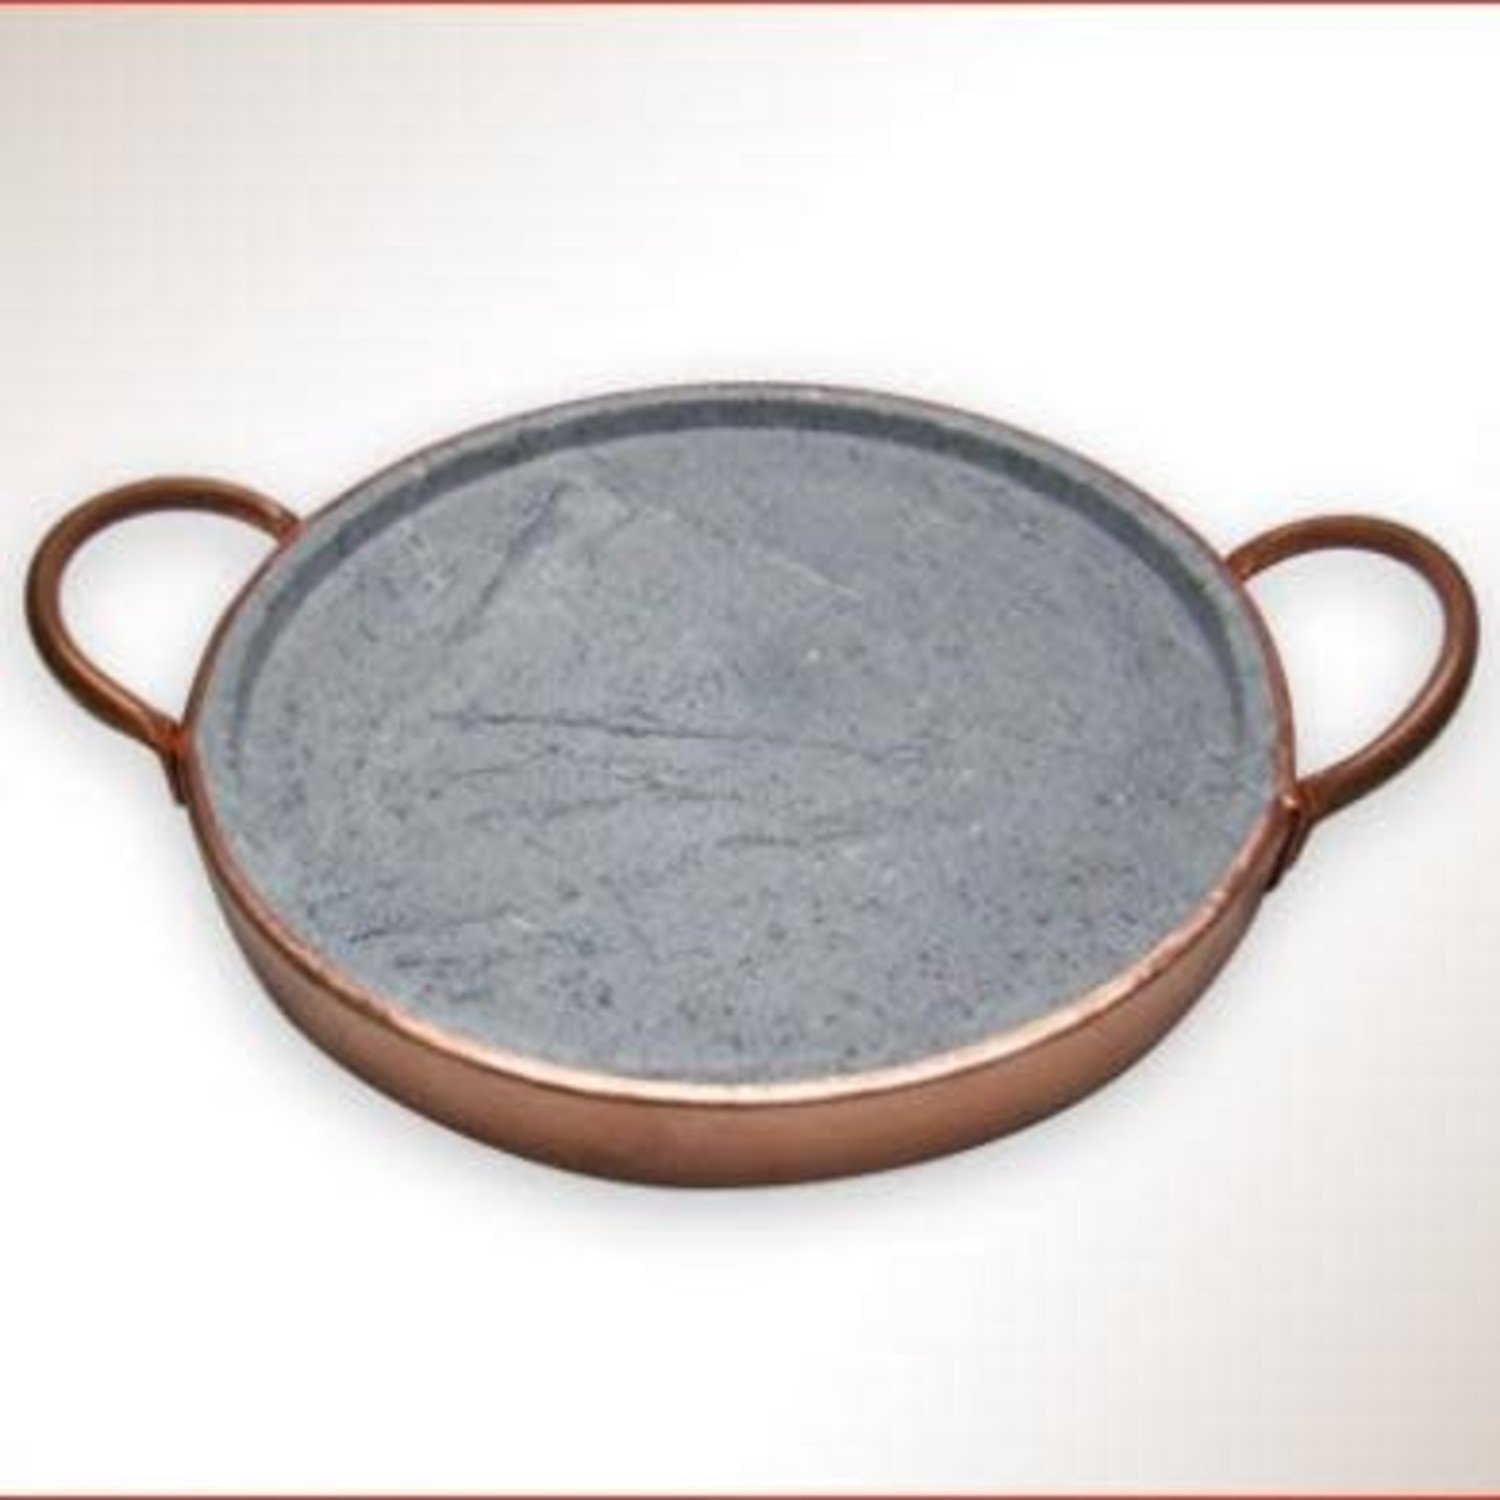 Blog - Soapstone cookware by way of Brazil! - Whisk